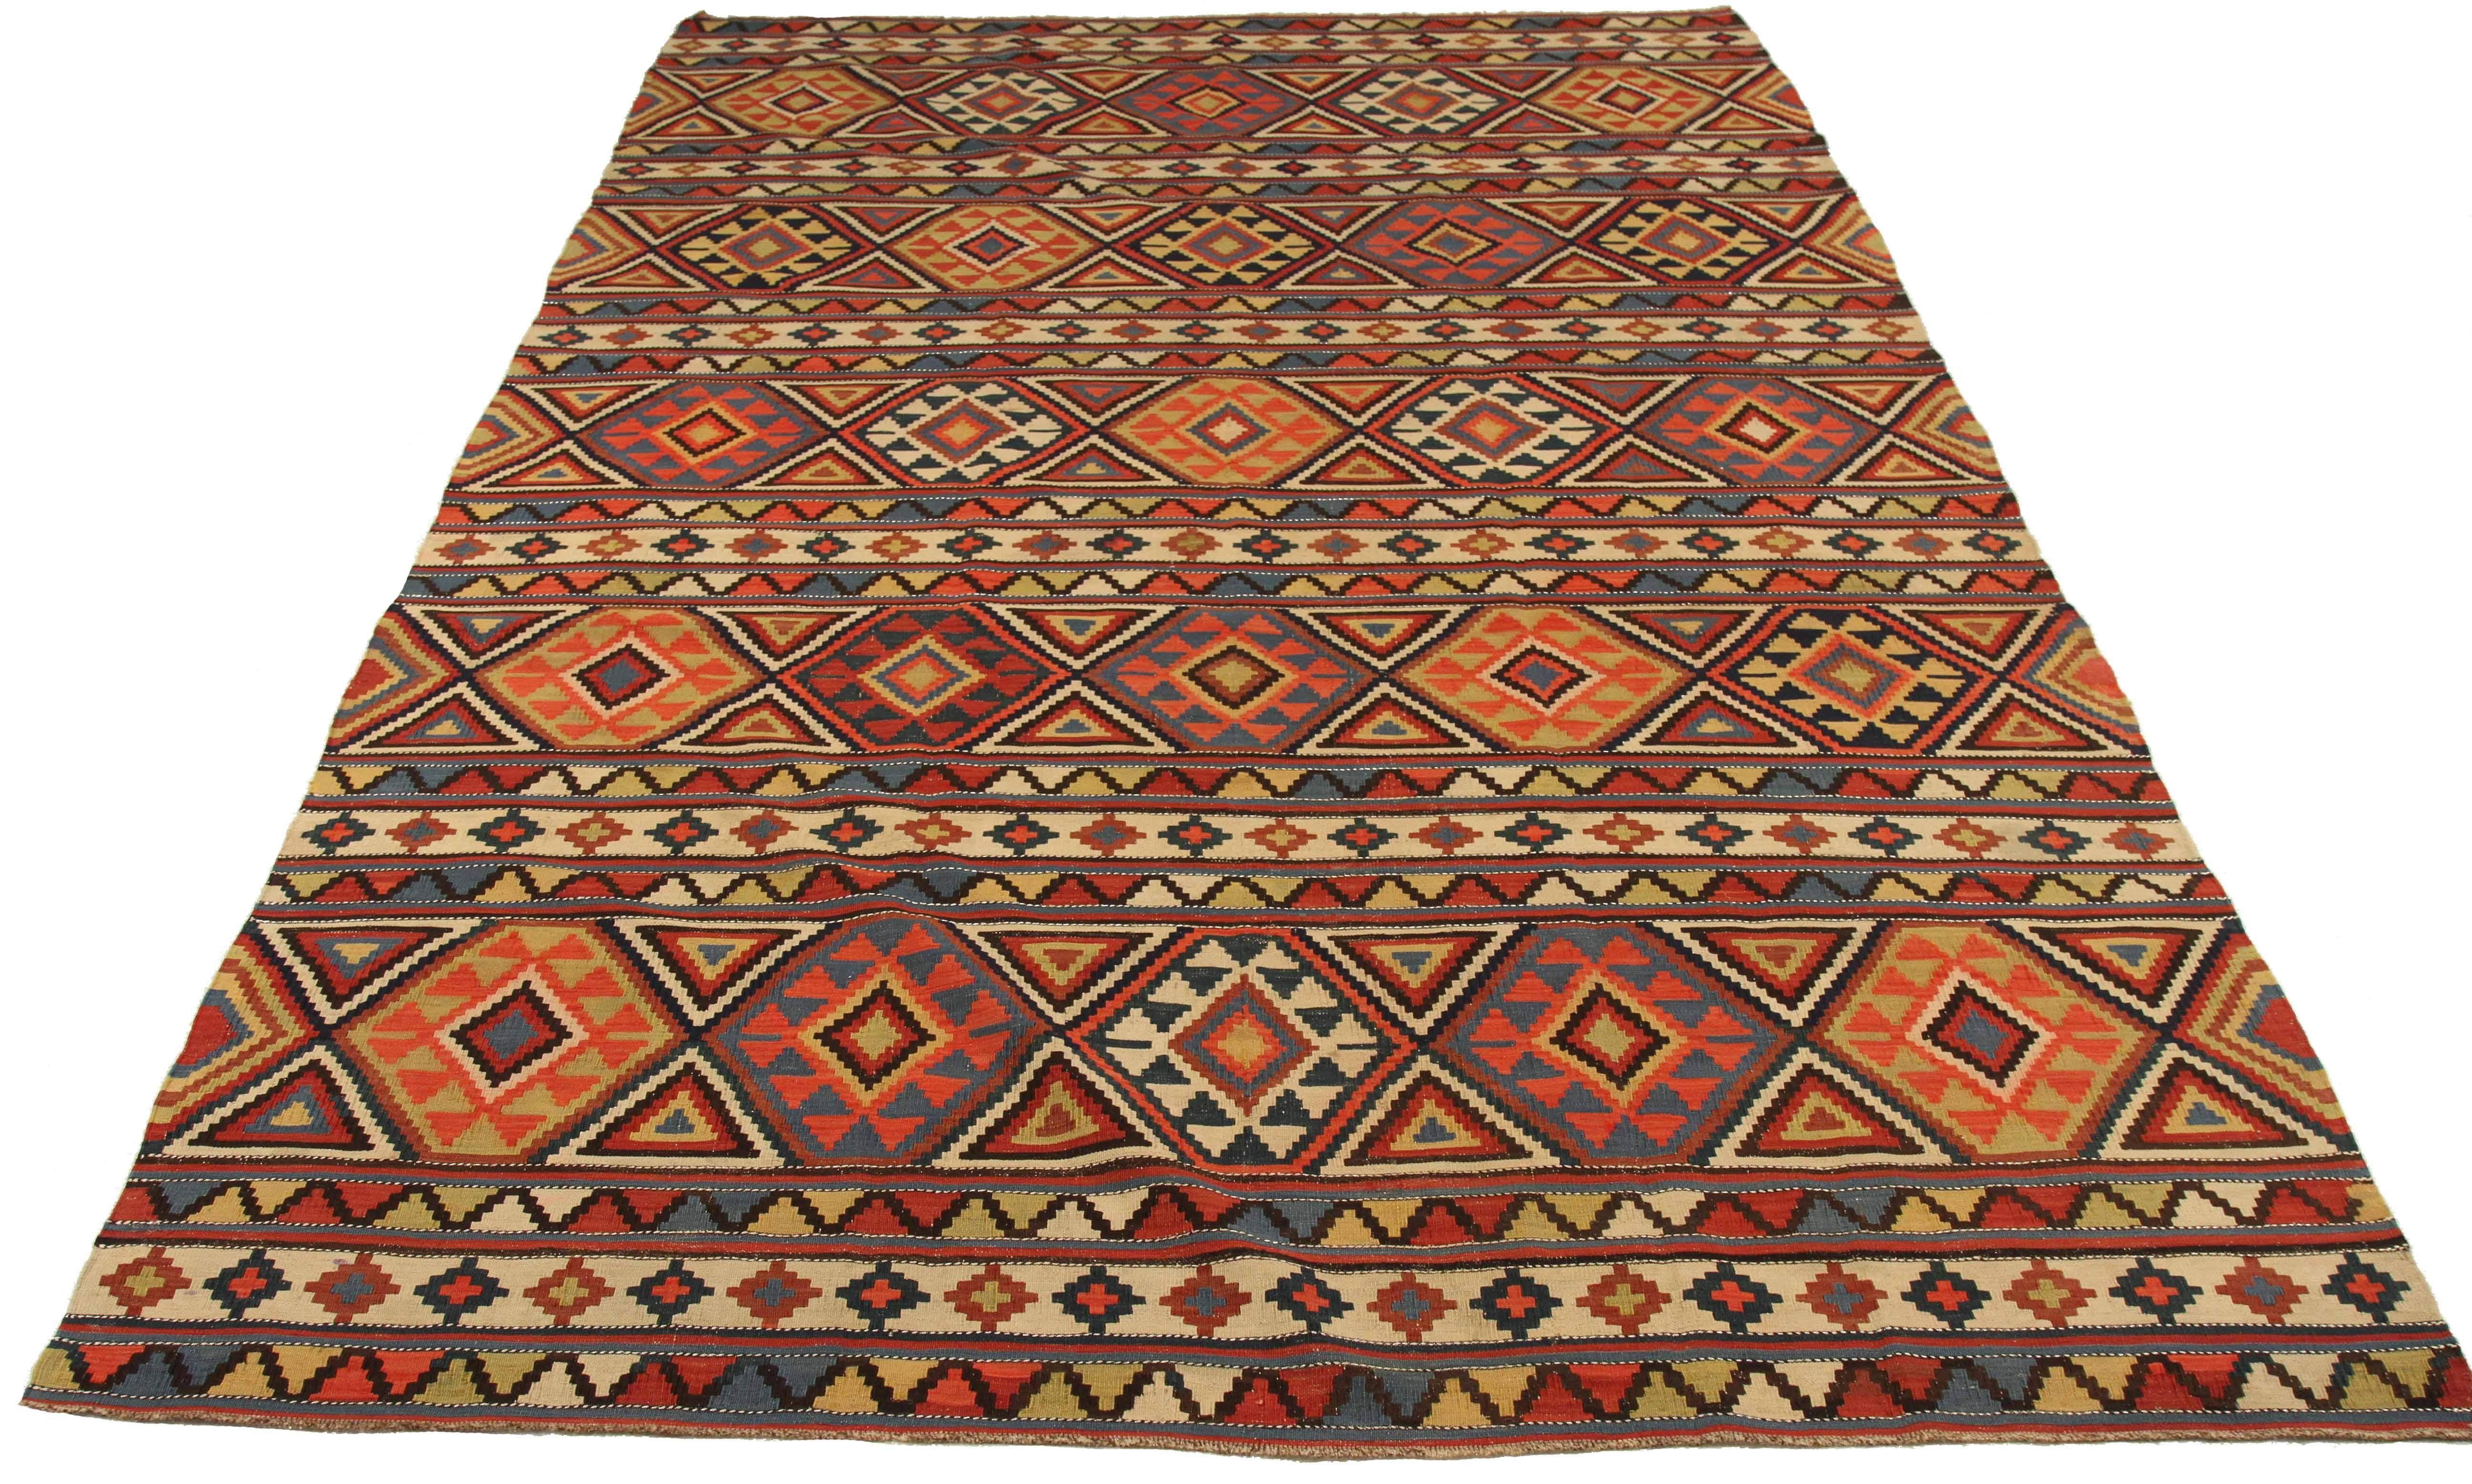 Antique Russian area rug handwoven from the finest sheep’s wool. It’s colored with all-natural vegetable dyes that are safe for humans and pets. It’s a traditional Kilim design handwoven by expert artisans. It’s a lovely area rug that can be